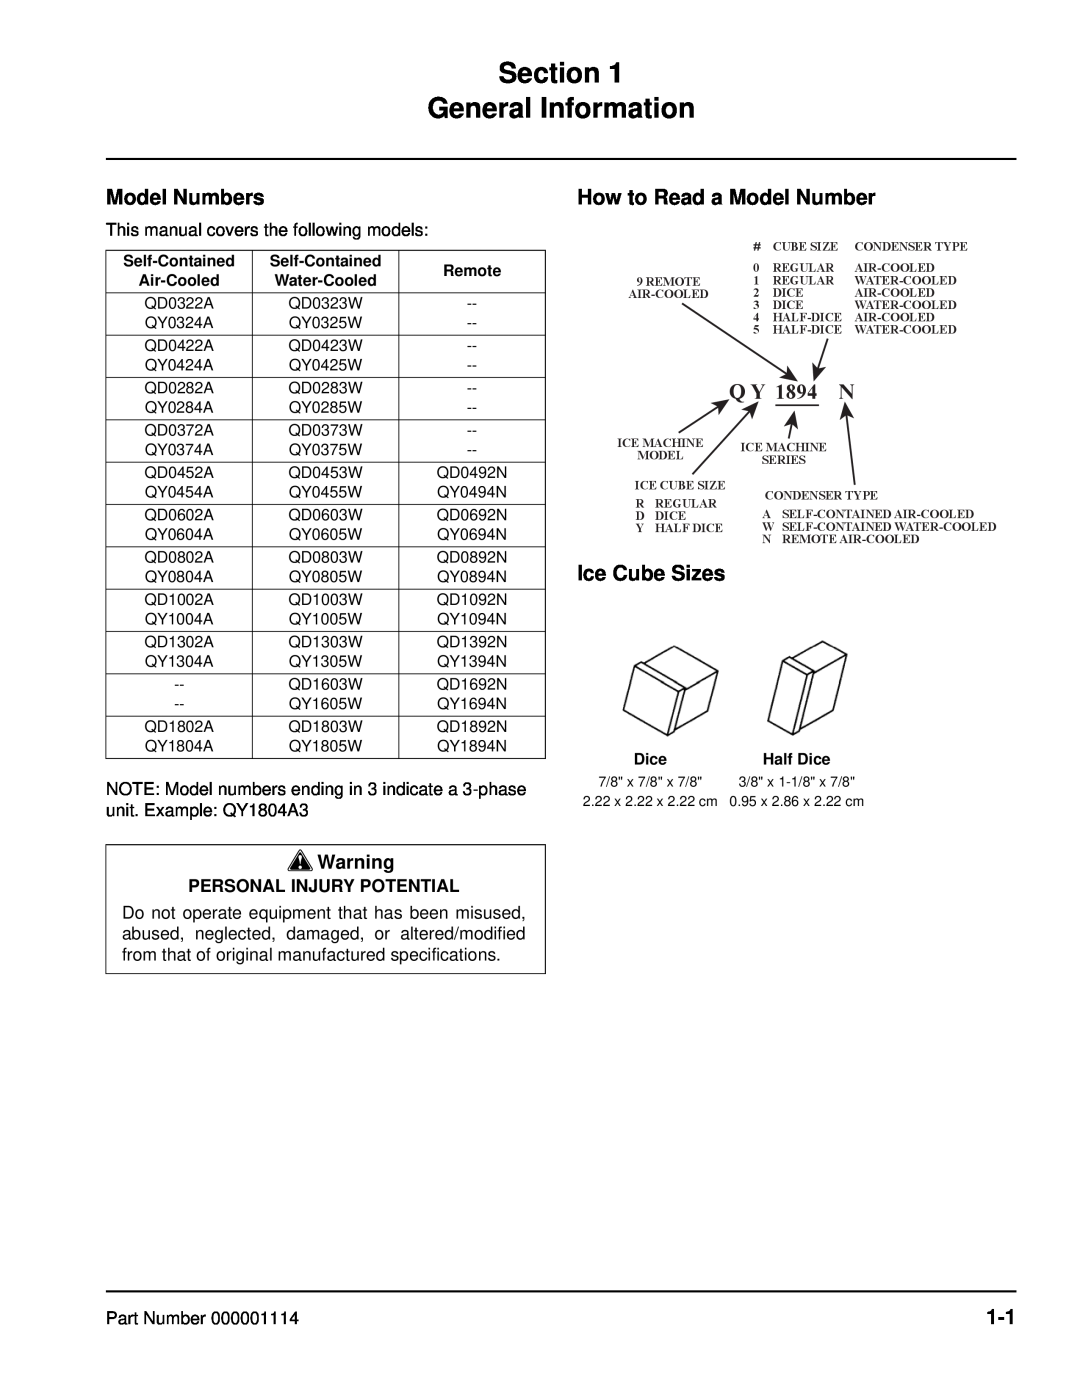 Manitowoc Ice manual Section General Information, Model Numbers, How to Read a Model Number, Ice Cube Sizes, Q Y 1894N 